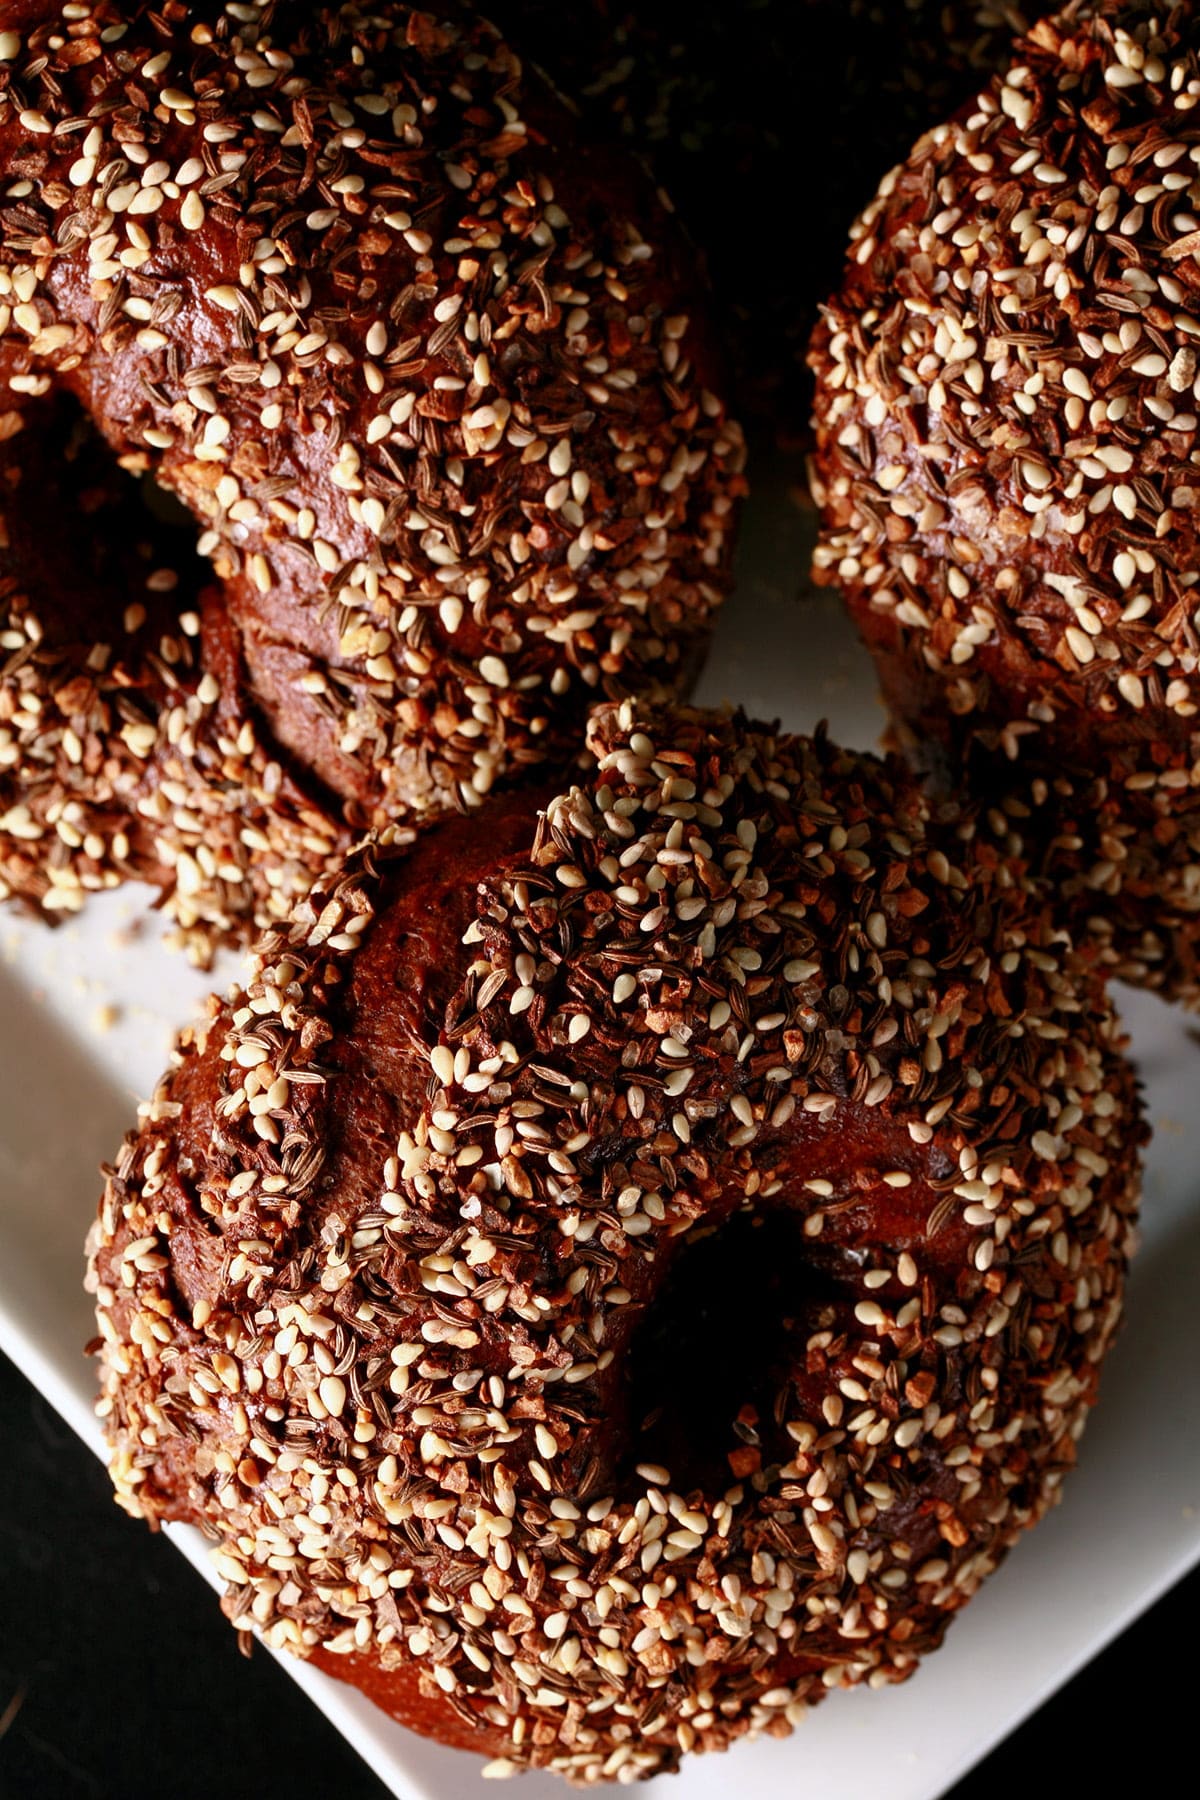 Several "Everything" style Pumpernickel Bagels on a square white plate.